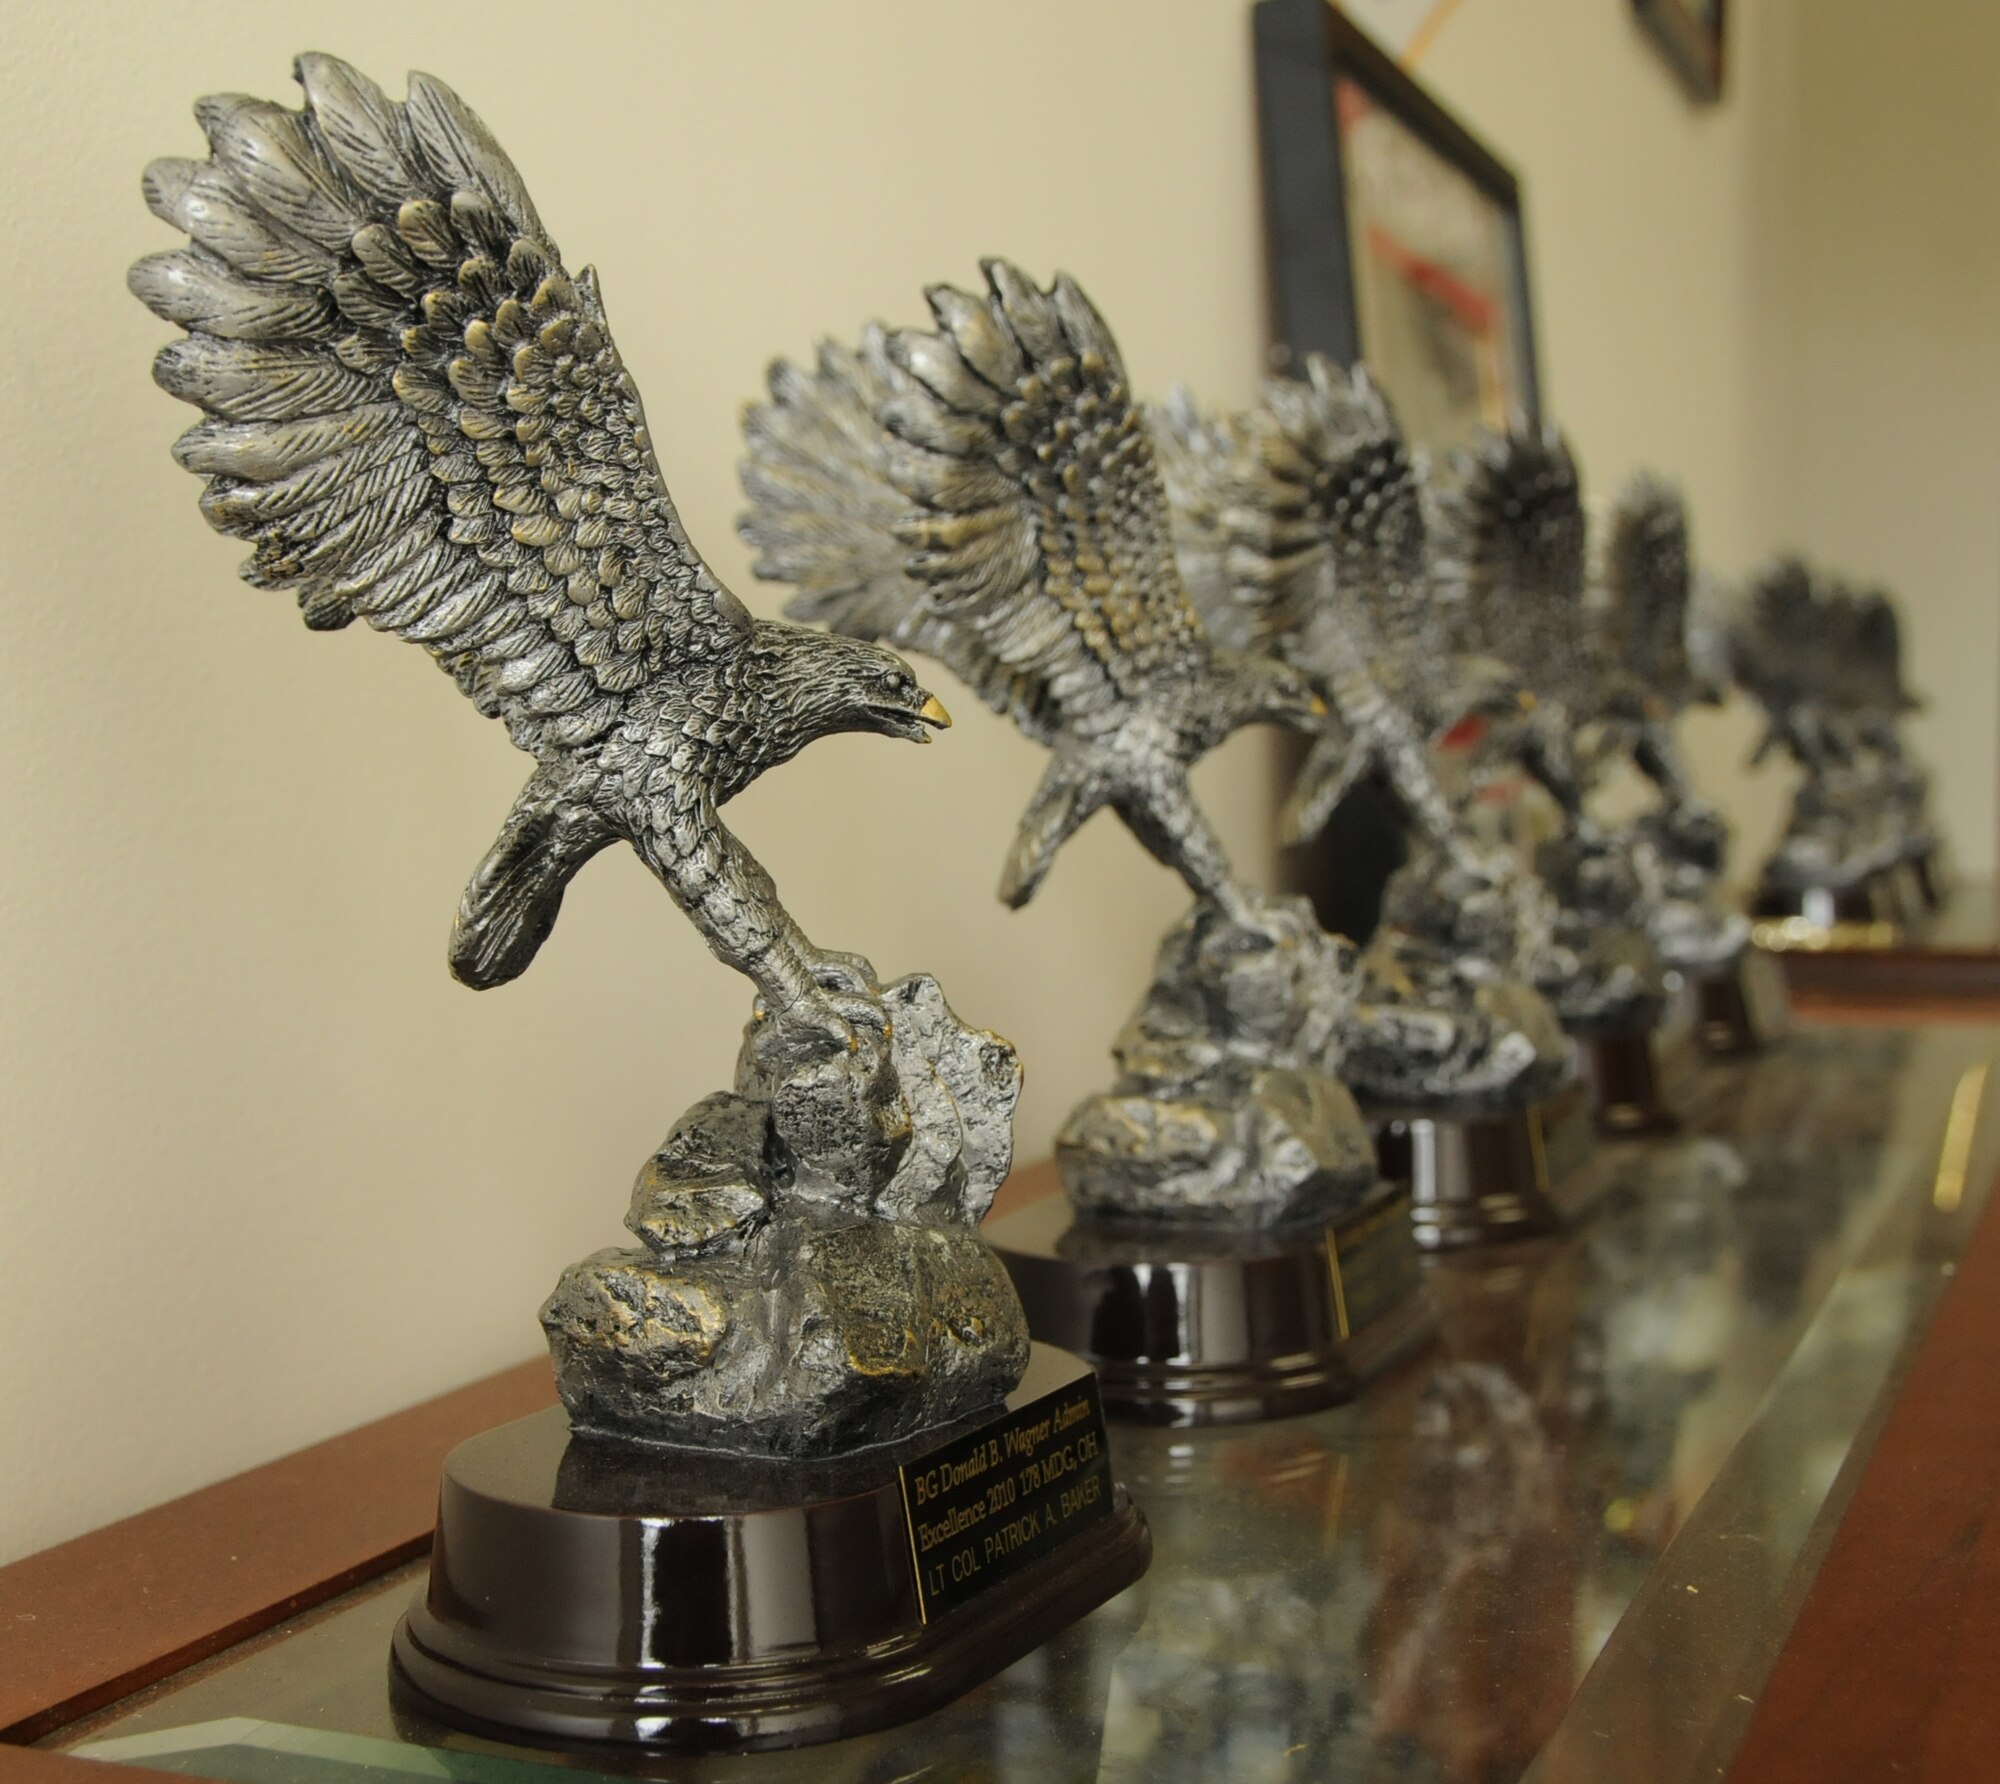 The 178th Medical Group received nine national-level awards June 25 at the 2011 Air National Guard Medical Service Annual Awards Ceremony in San Antonio.